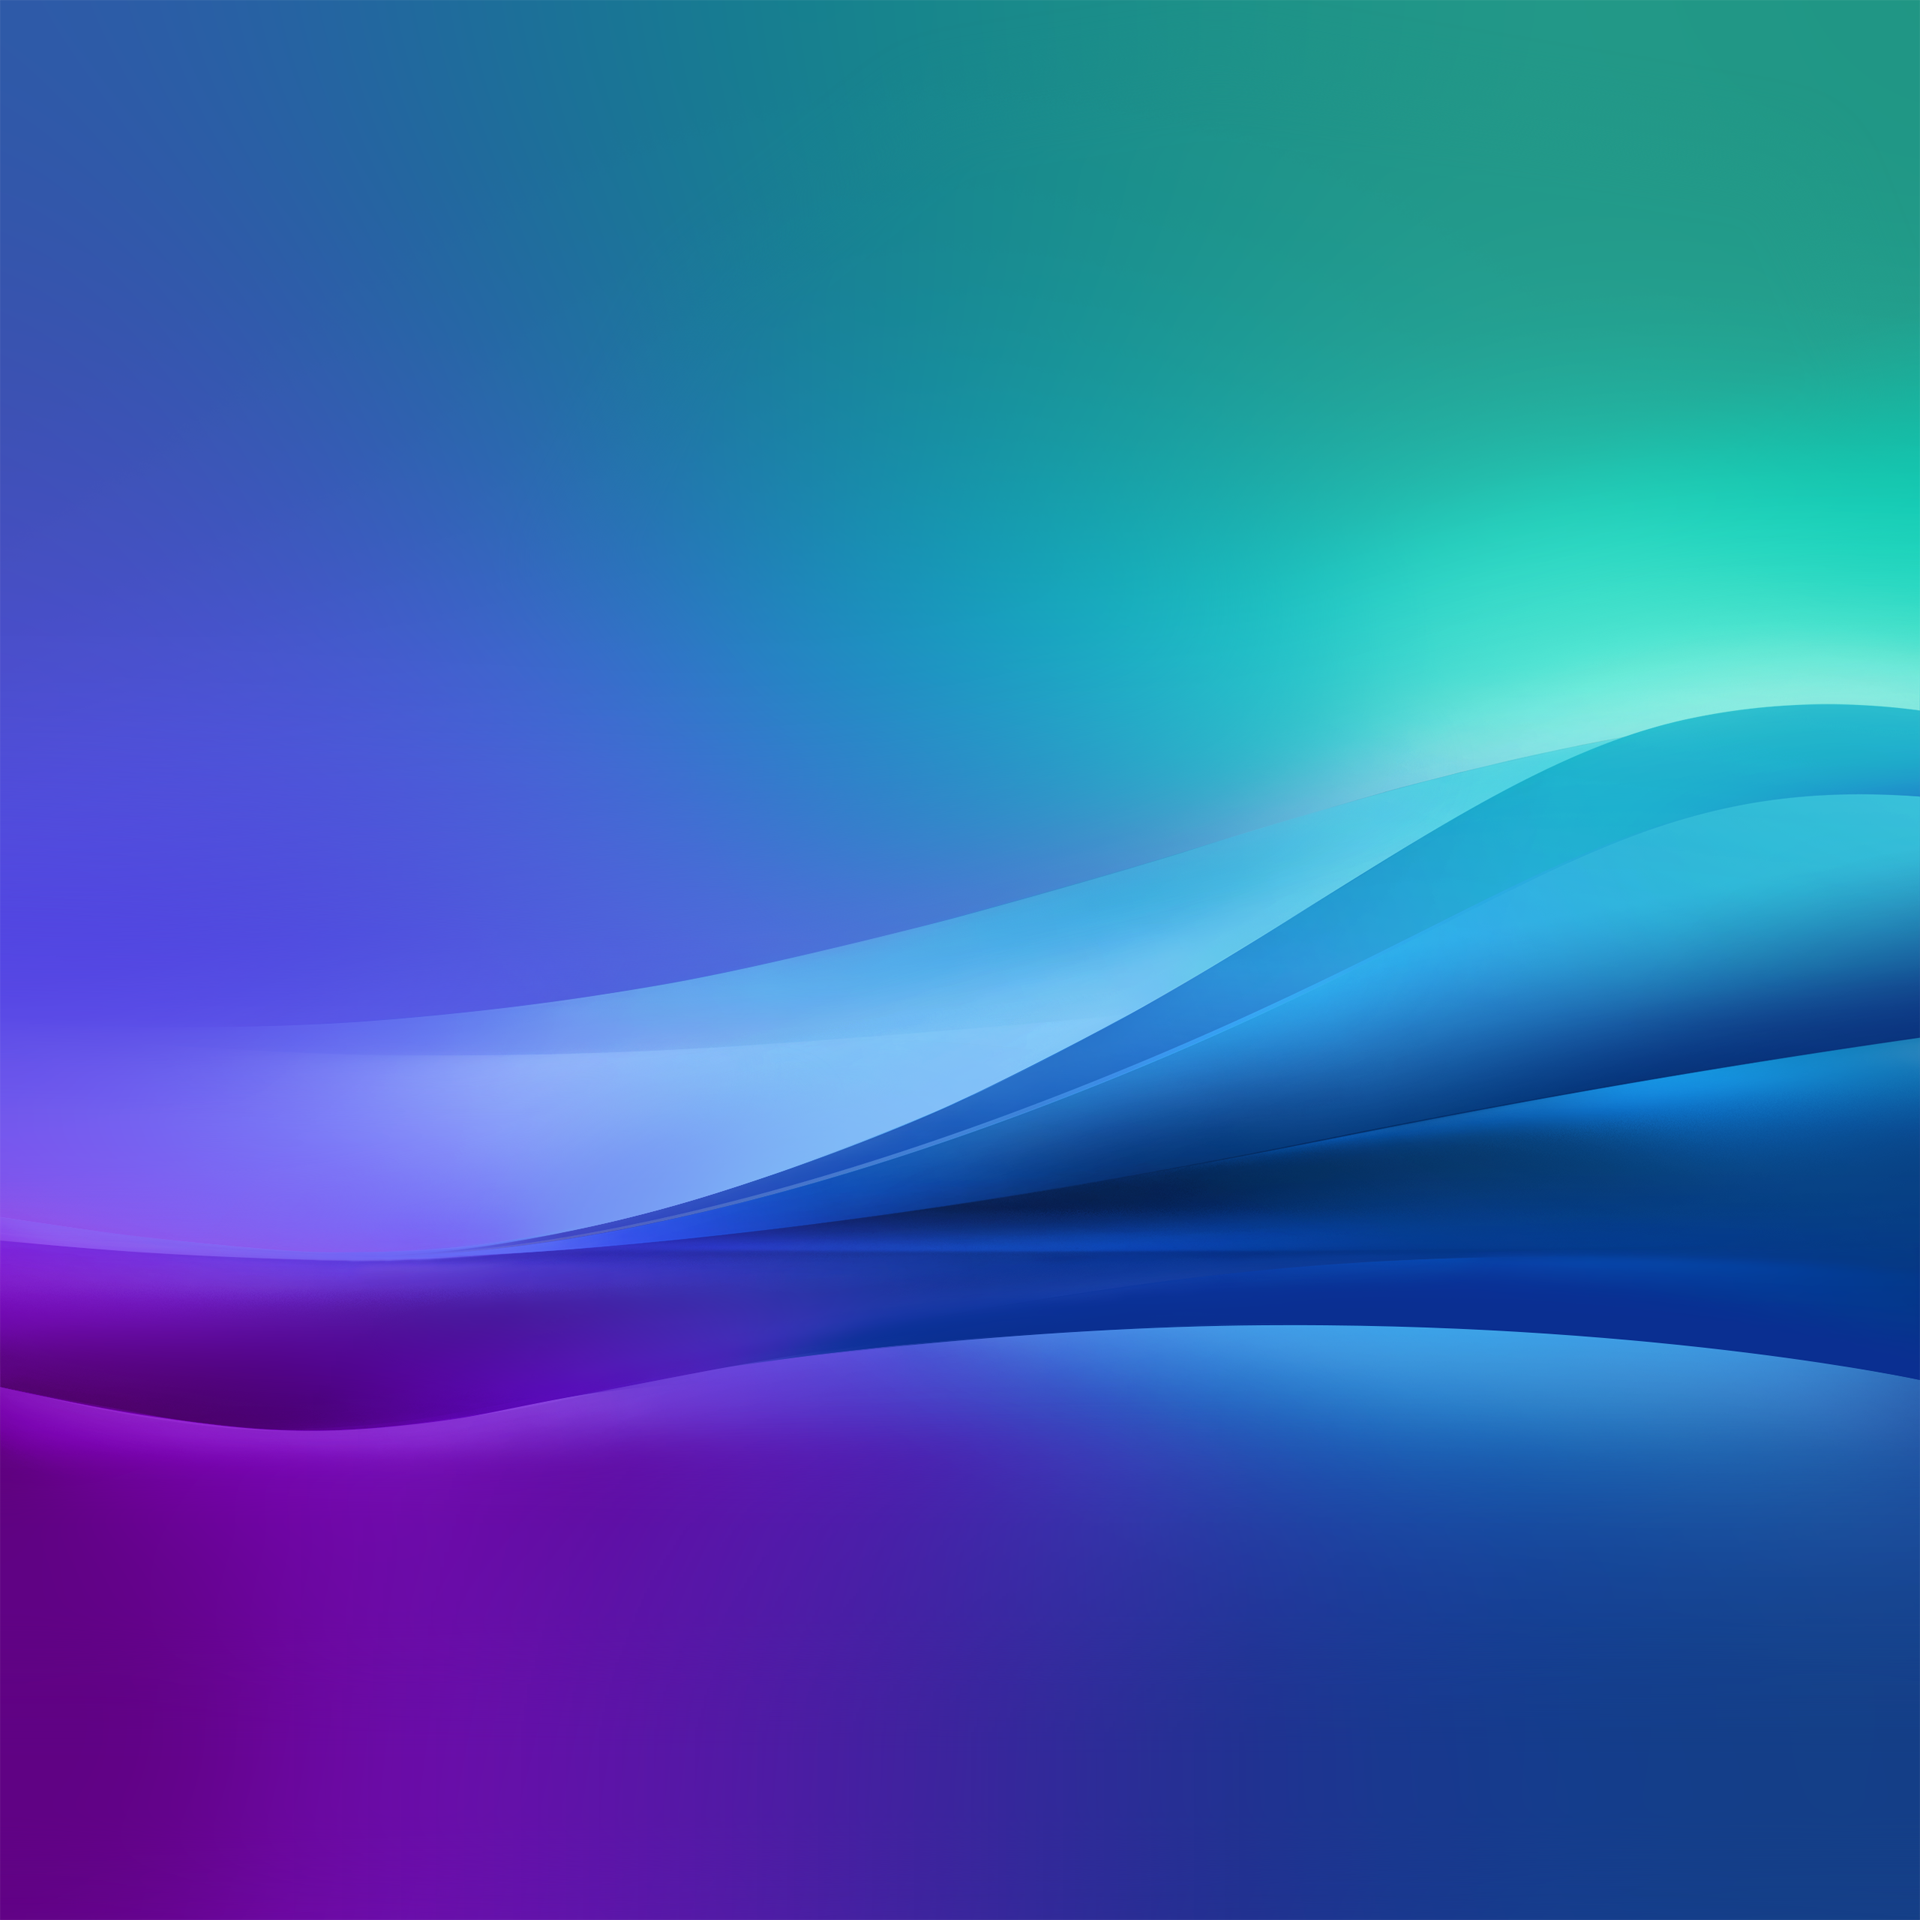 Free Download Galaxy S8 Wallpaper Icon Wallpaper Hd Part 3 19x19 For Your Desktop Mobile Tablet Explore 94 Galaxy S8 Wallpapers Galaxy S8 Wallpapers Samsung Galaxy S8 Wallpapers Samsung